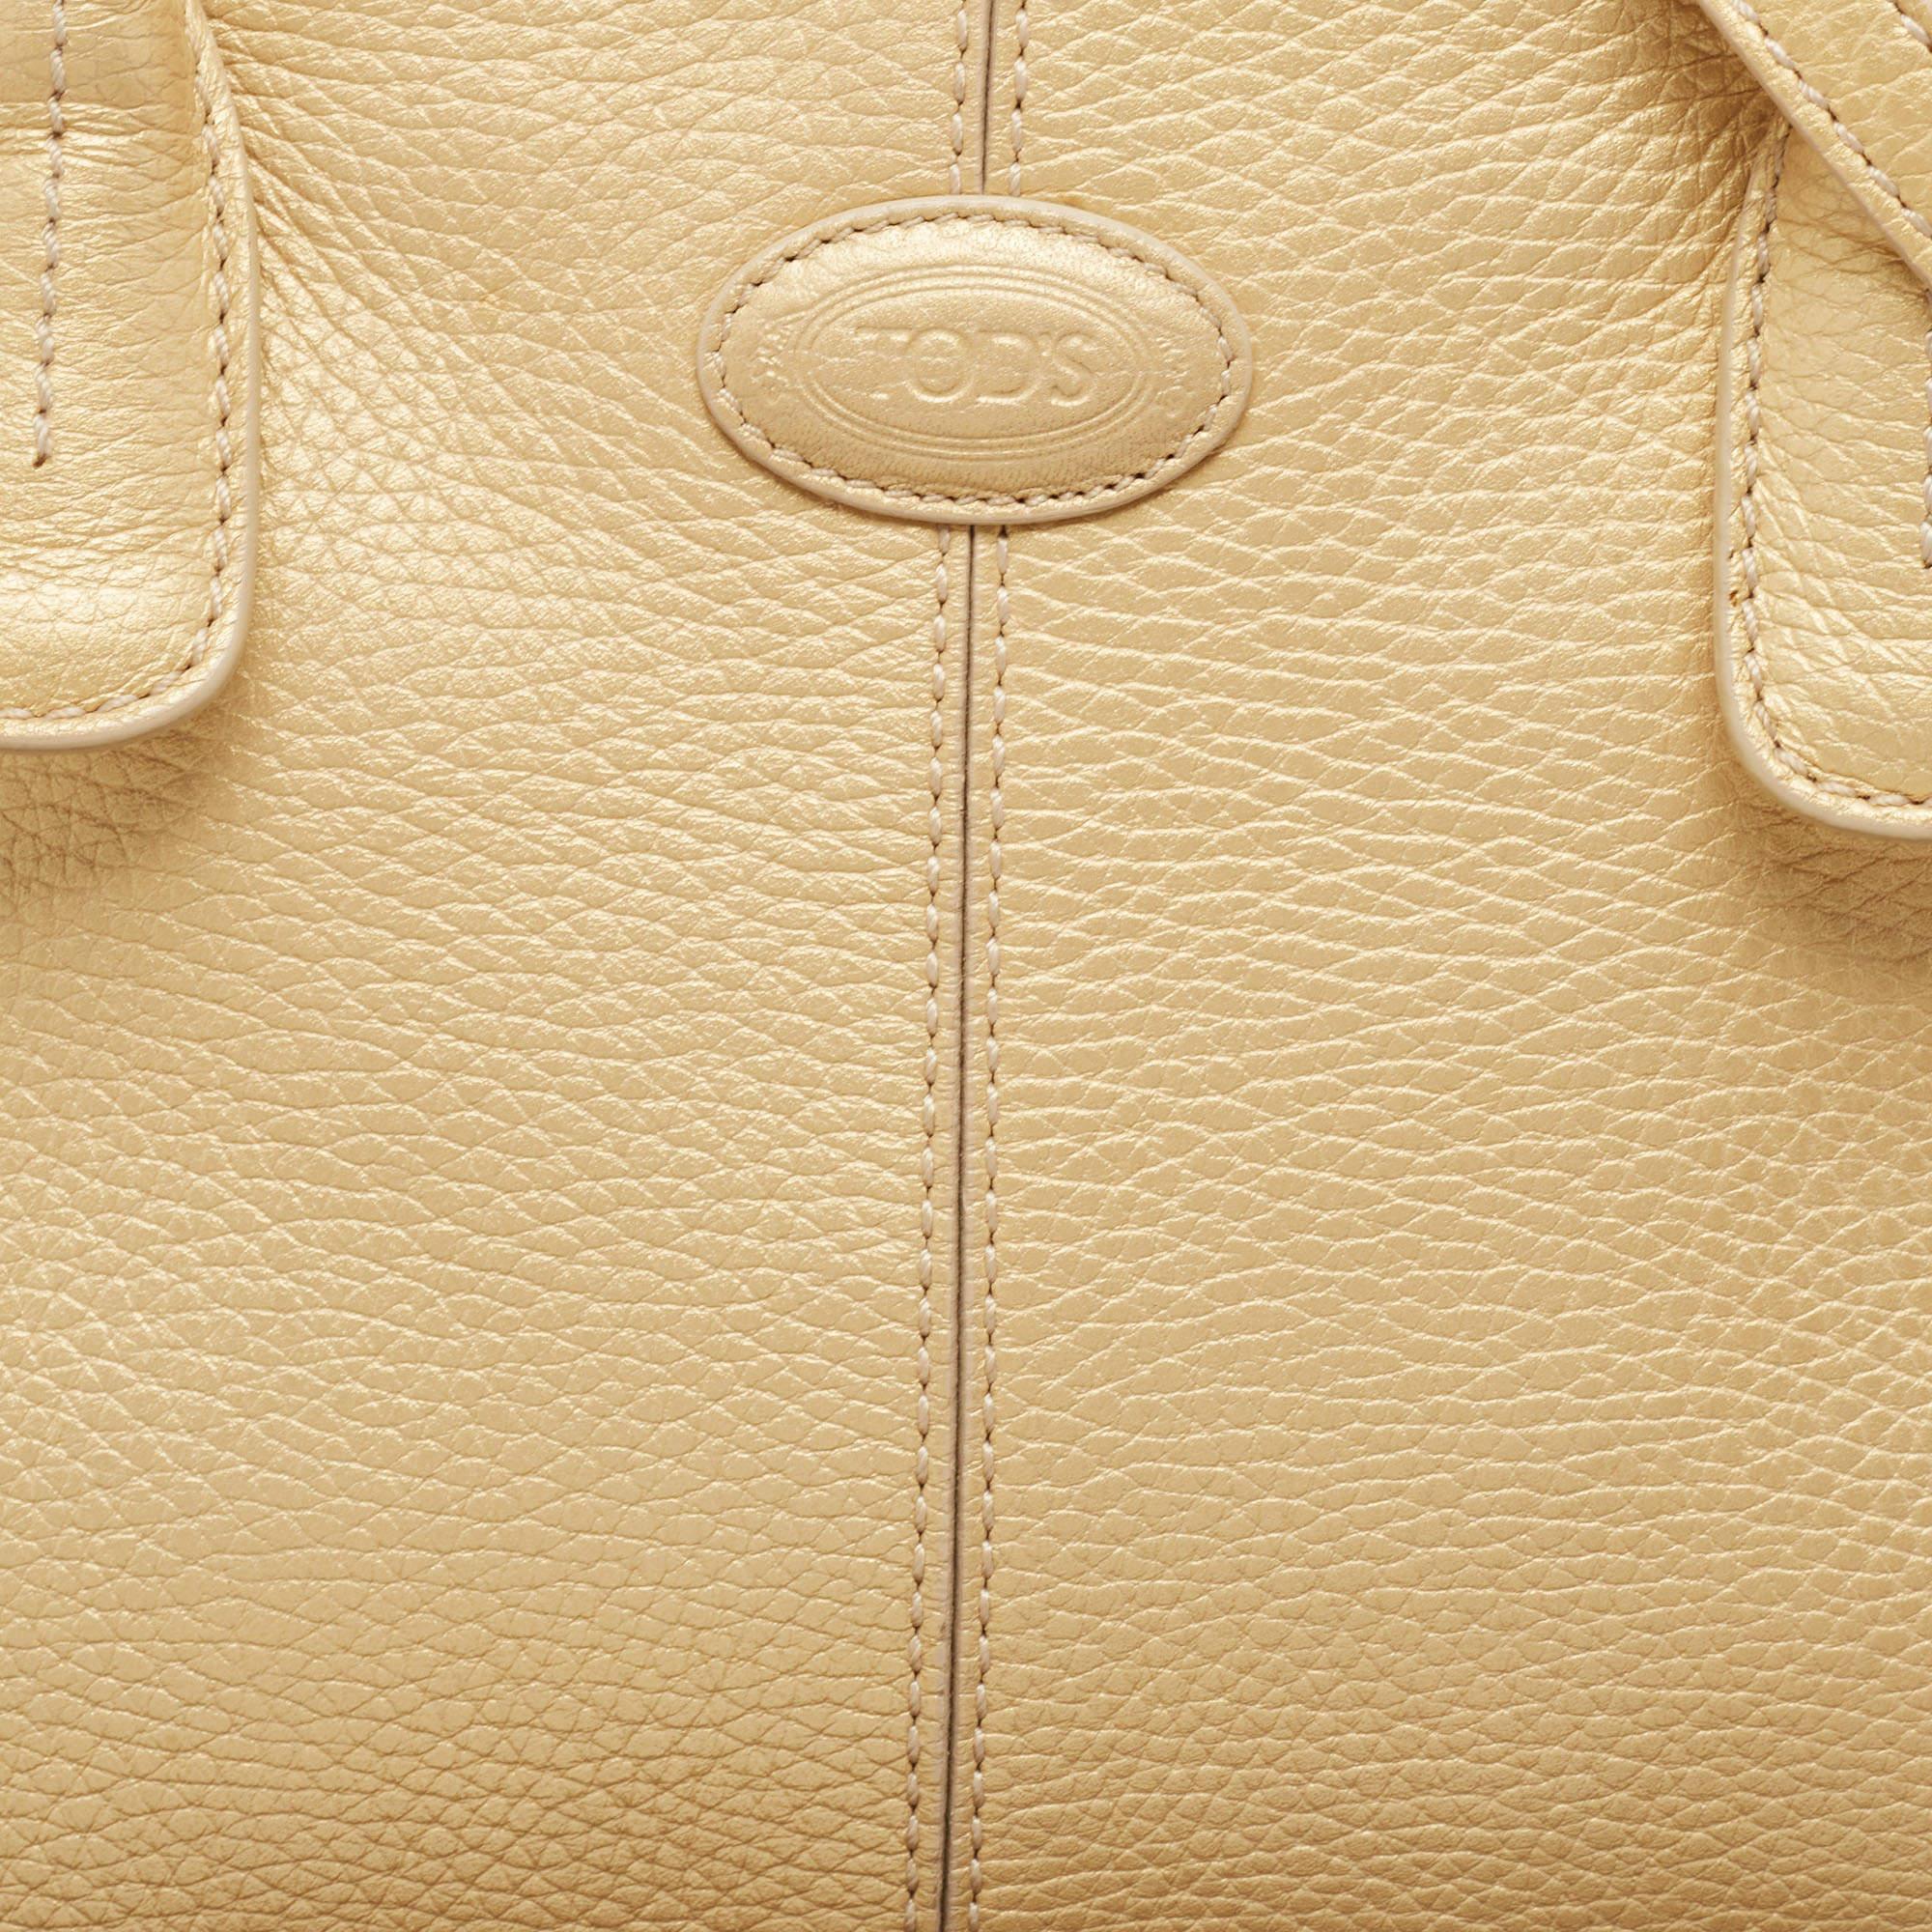 Tod's Gold Leather East/West New Girelli Satchel In Good Condition For Sale In Dubai, Al Qouz 2